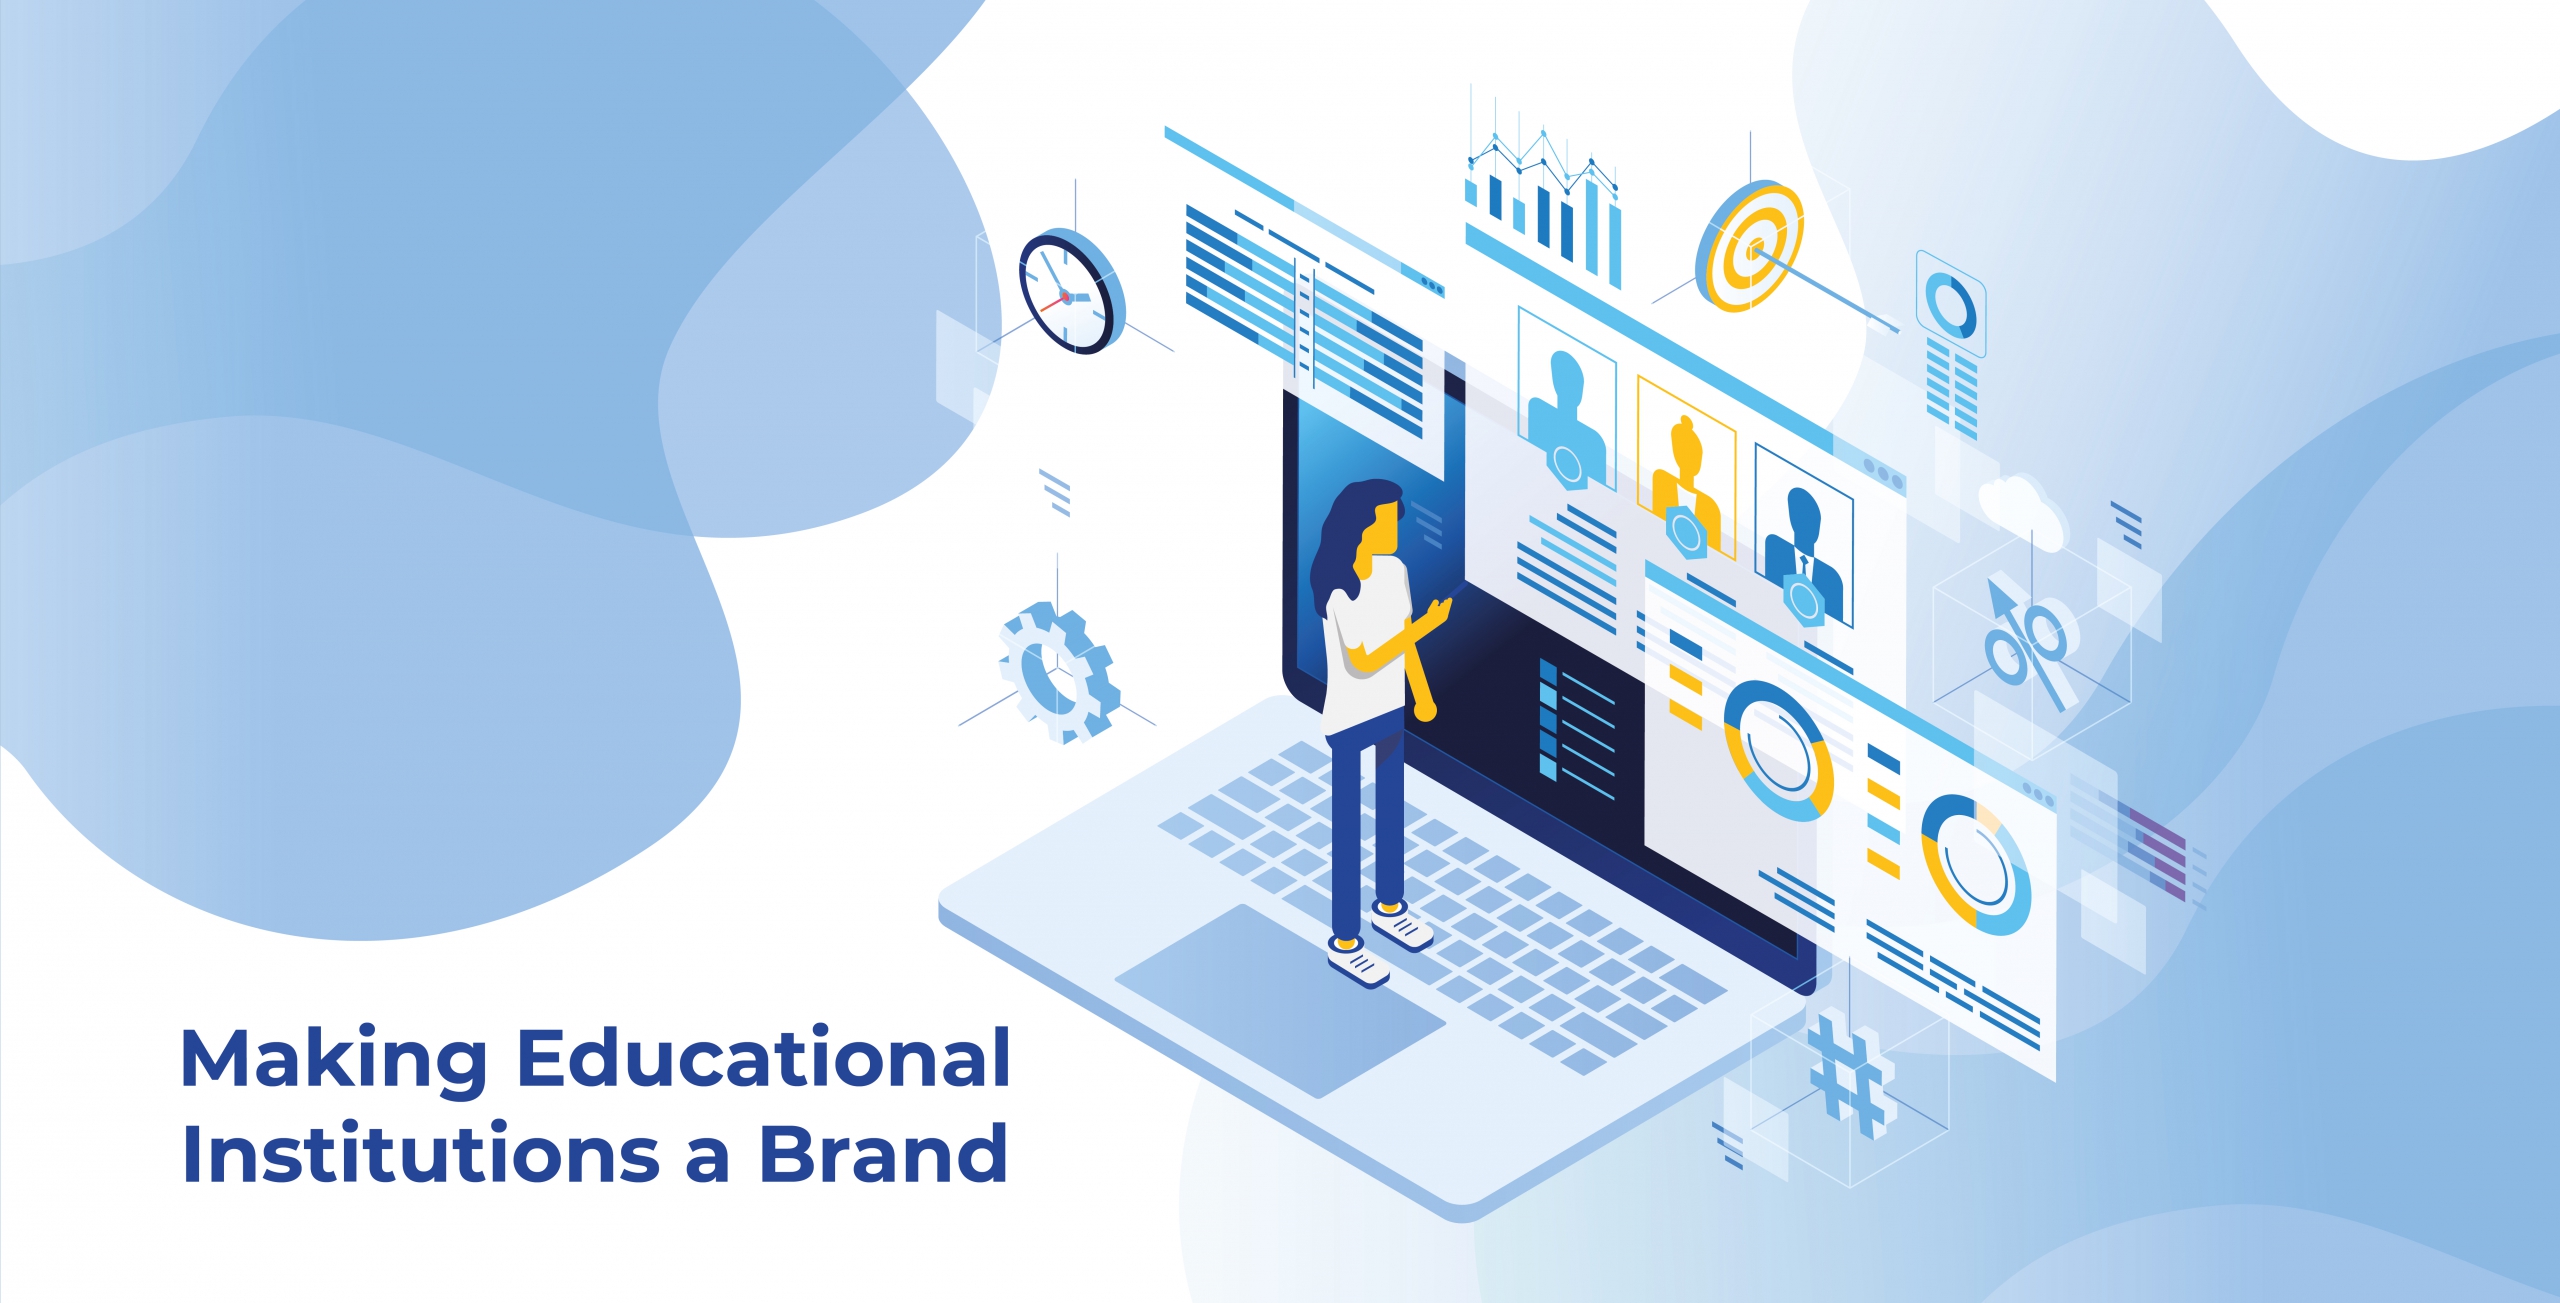 MAKING EDUCATIONAL INSTITUTIONS A BRAND